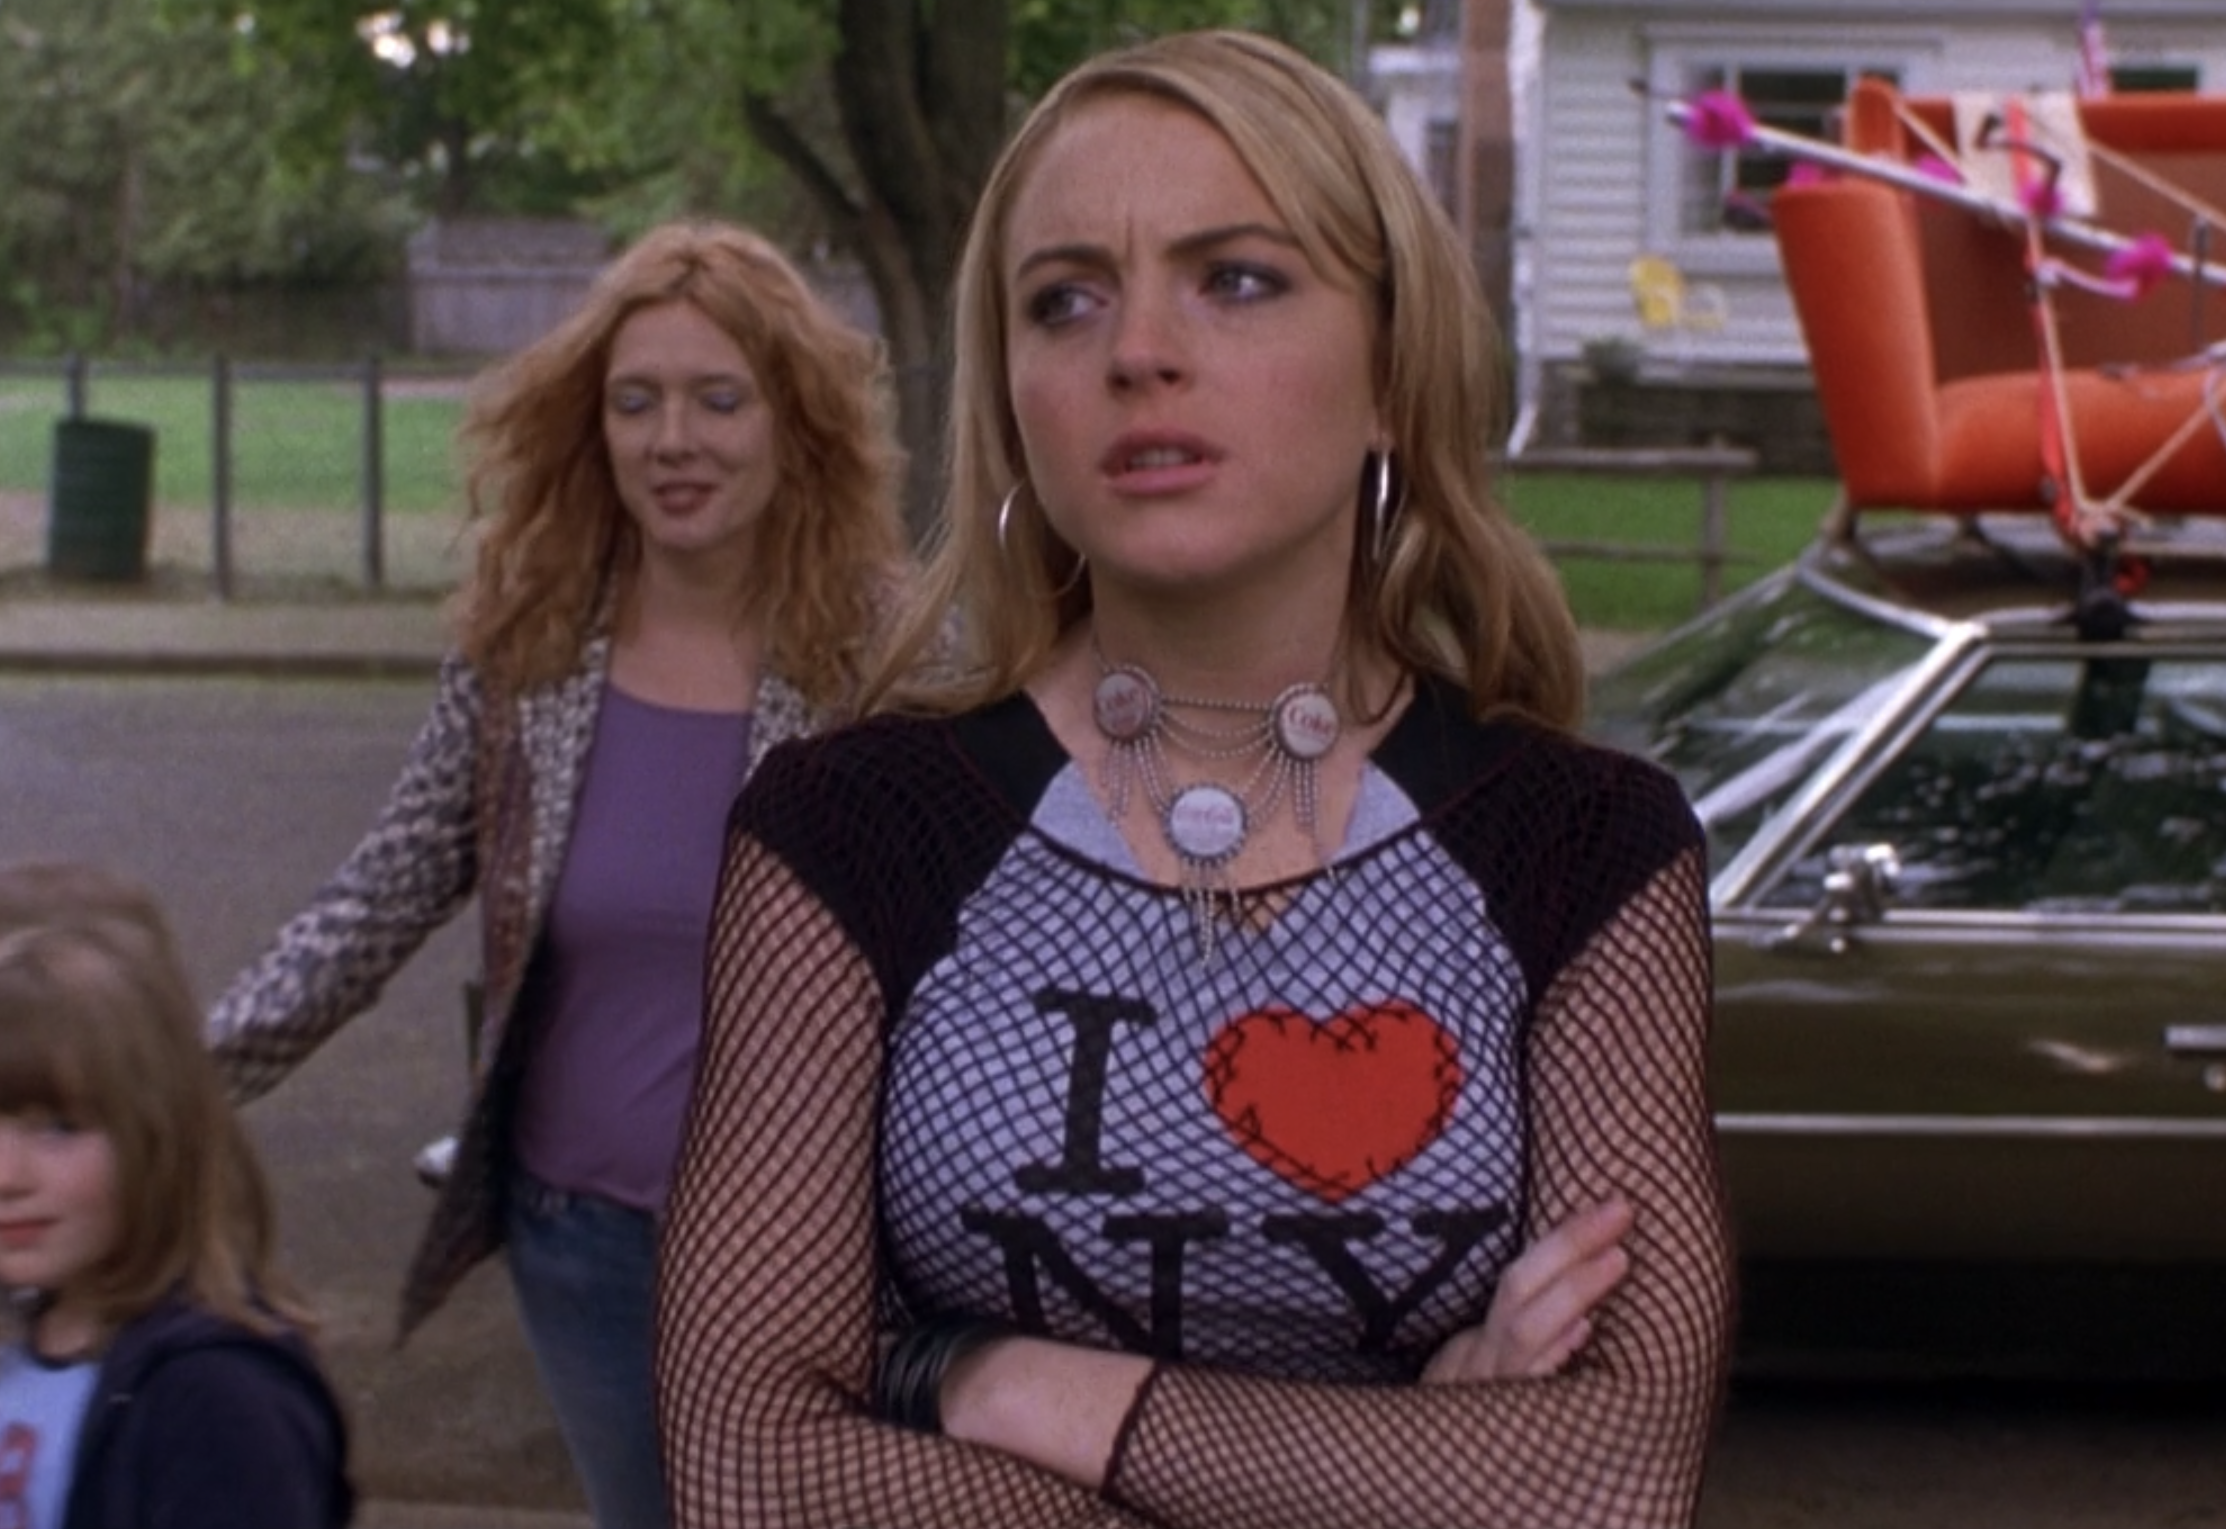 Lindsay Lohan crosses her arms, annoyed, as Lola in &quot;Confessions of a Teenage Drama Queen&quot;